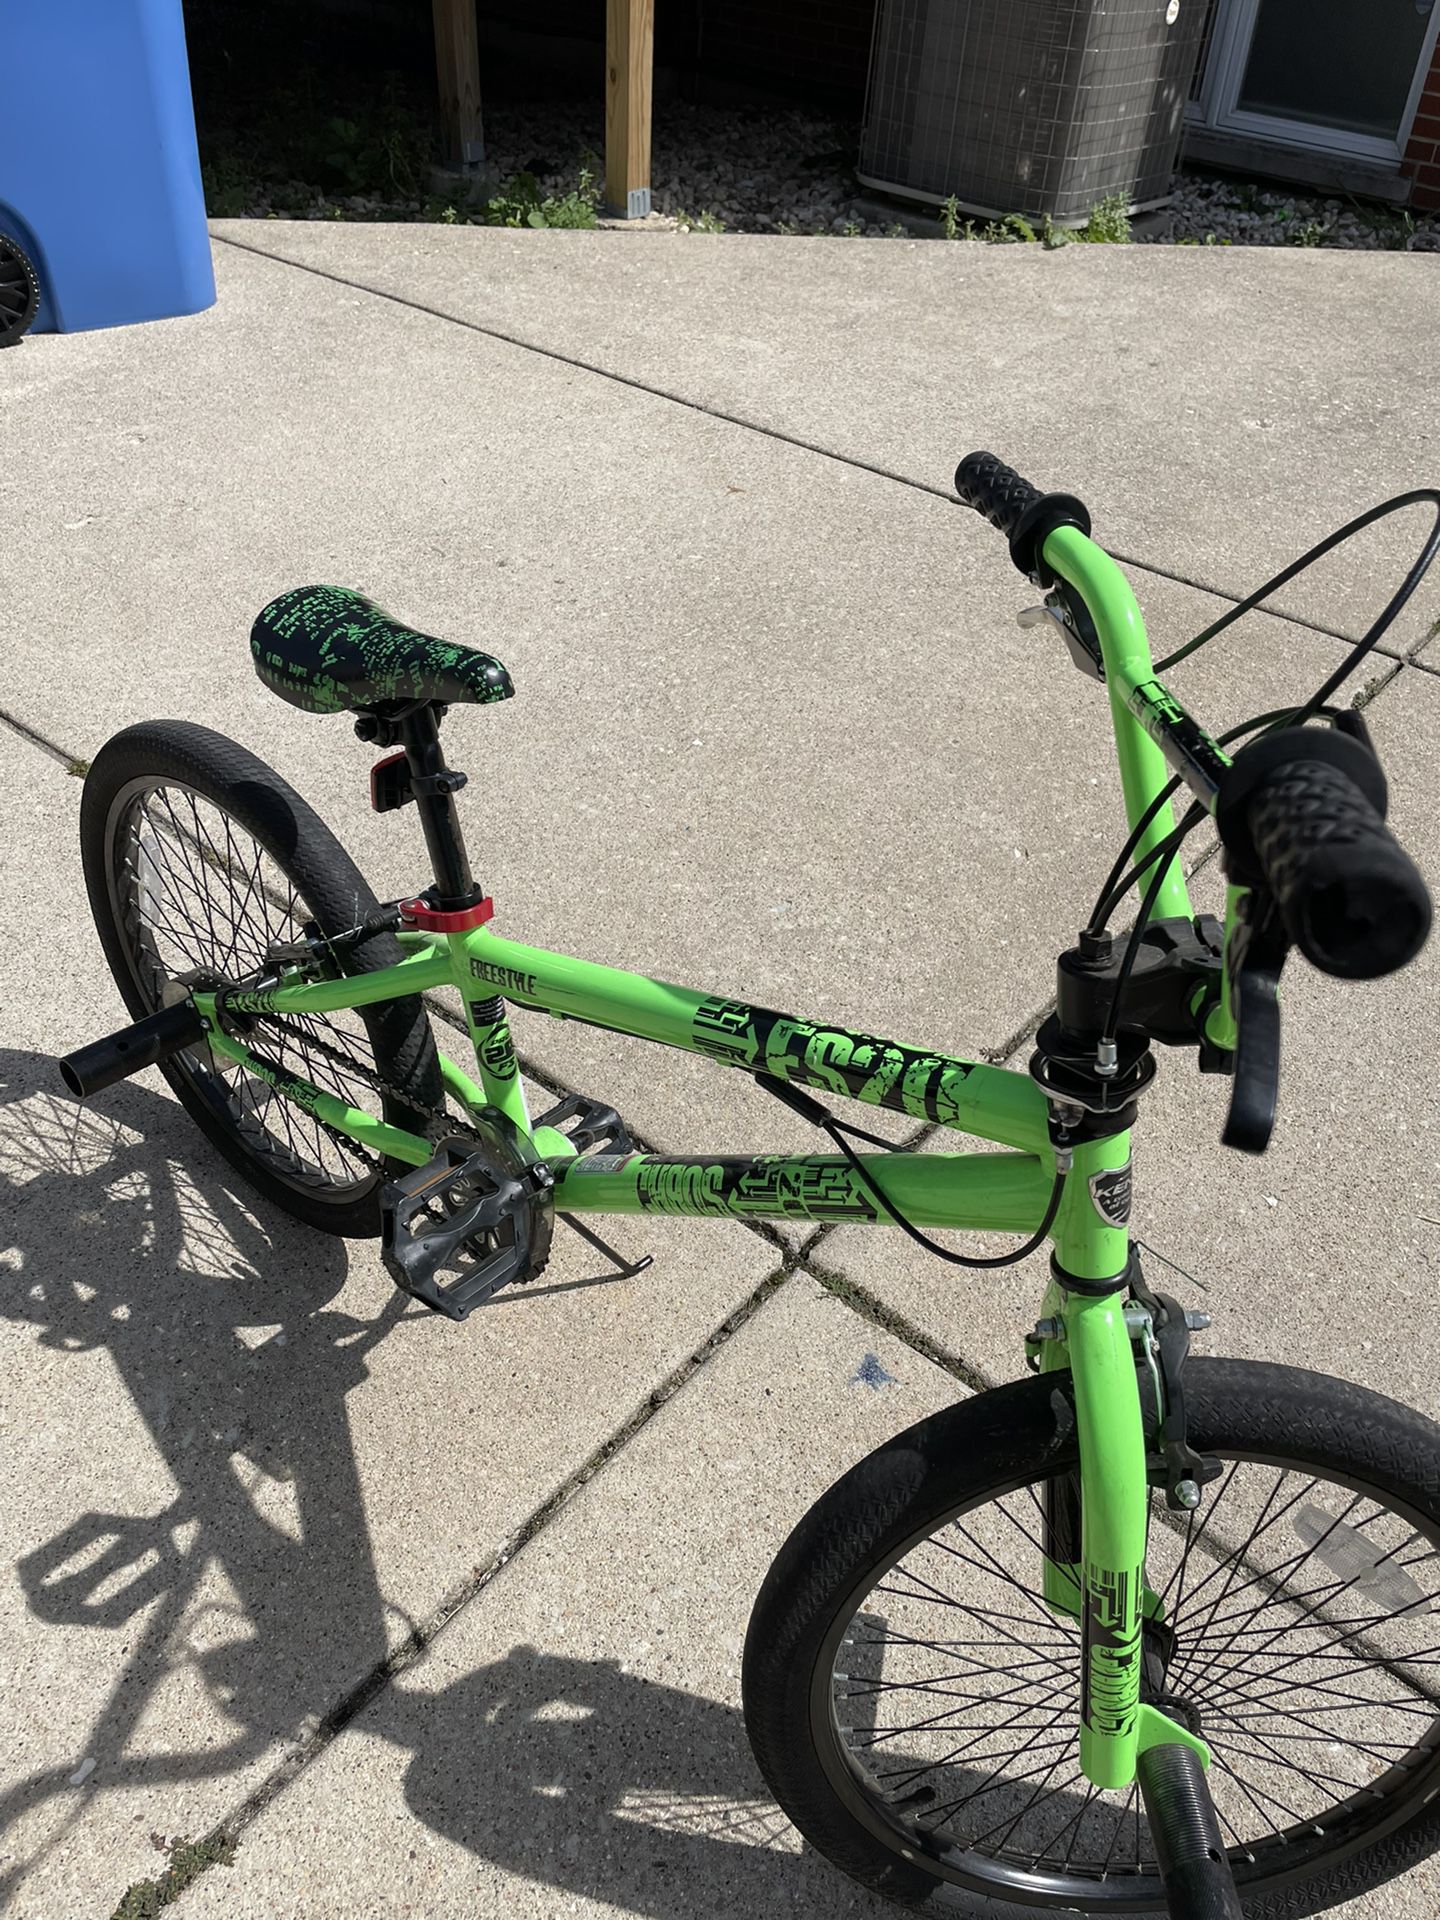 Kent 20’ Chaos FS20 Boys Freestyle Bike for Sale in Chicago, IL - OfferUp